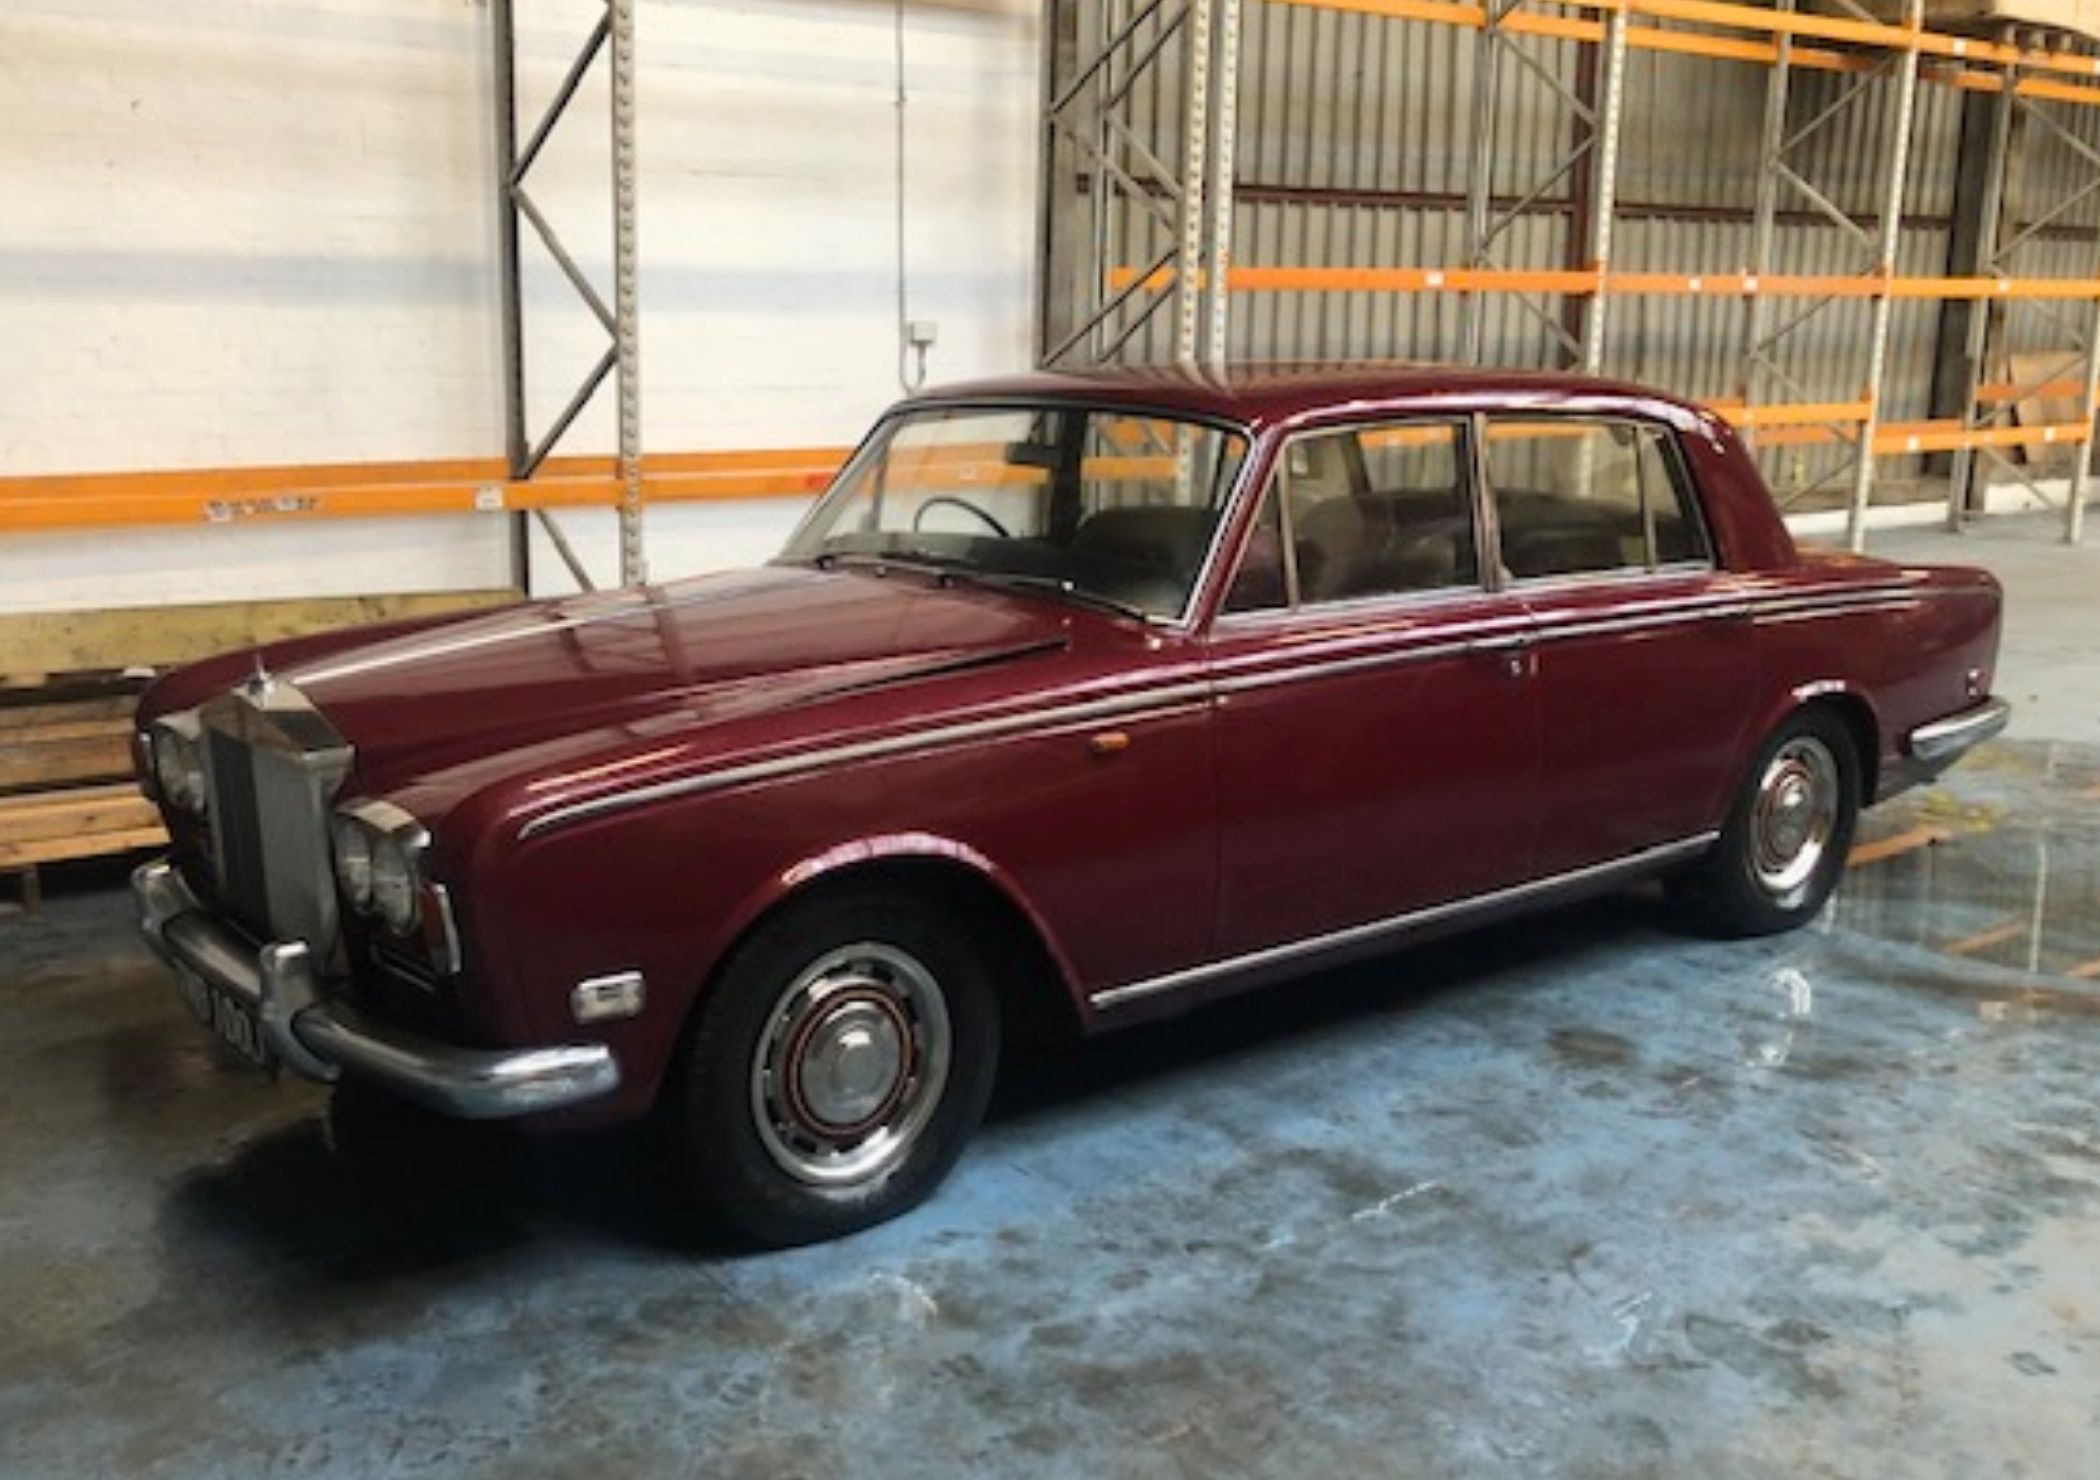 This RollsRoyce Silver Shadow Has the Electric Division Window  eBay  Motors Blog